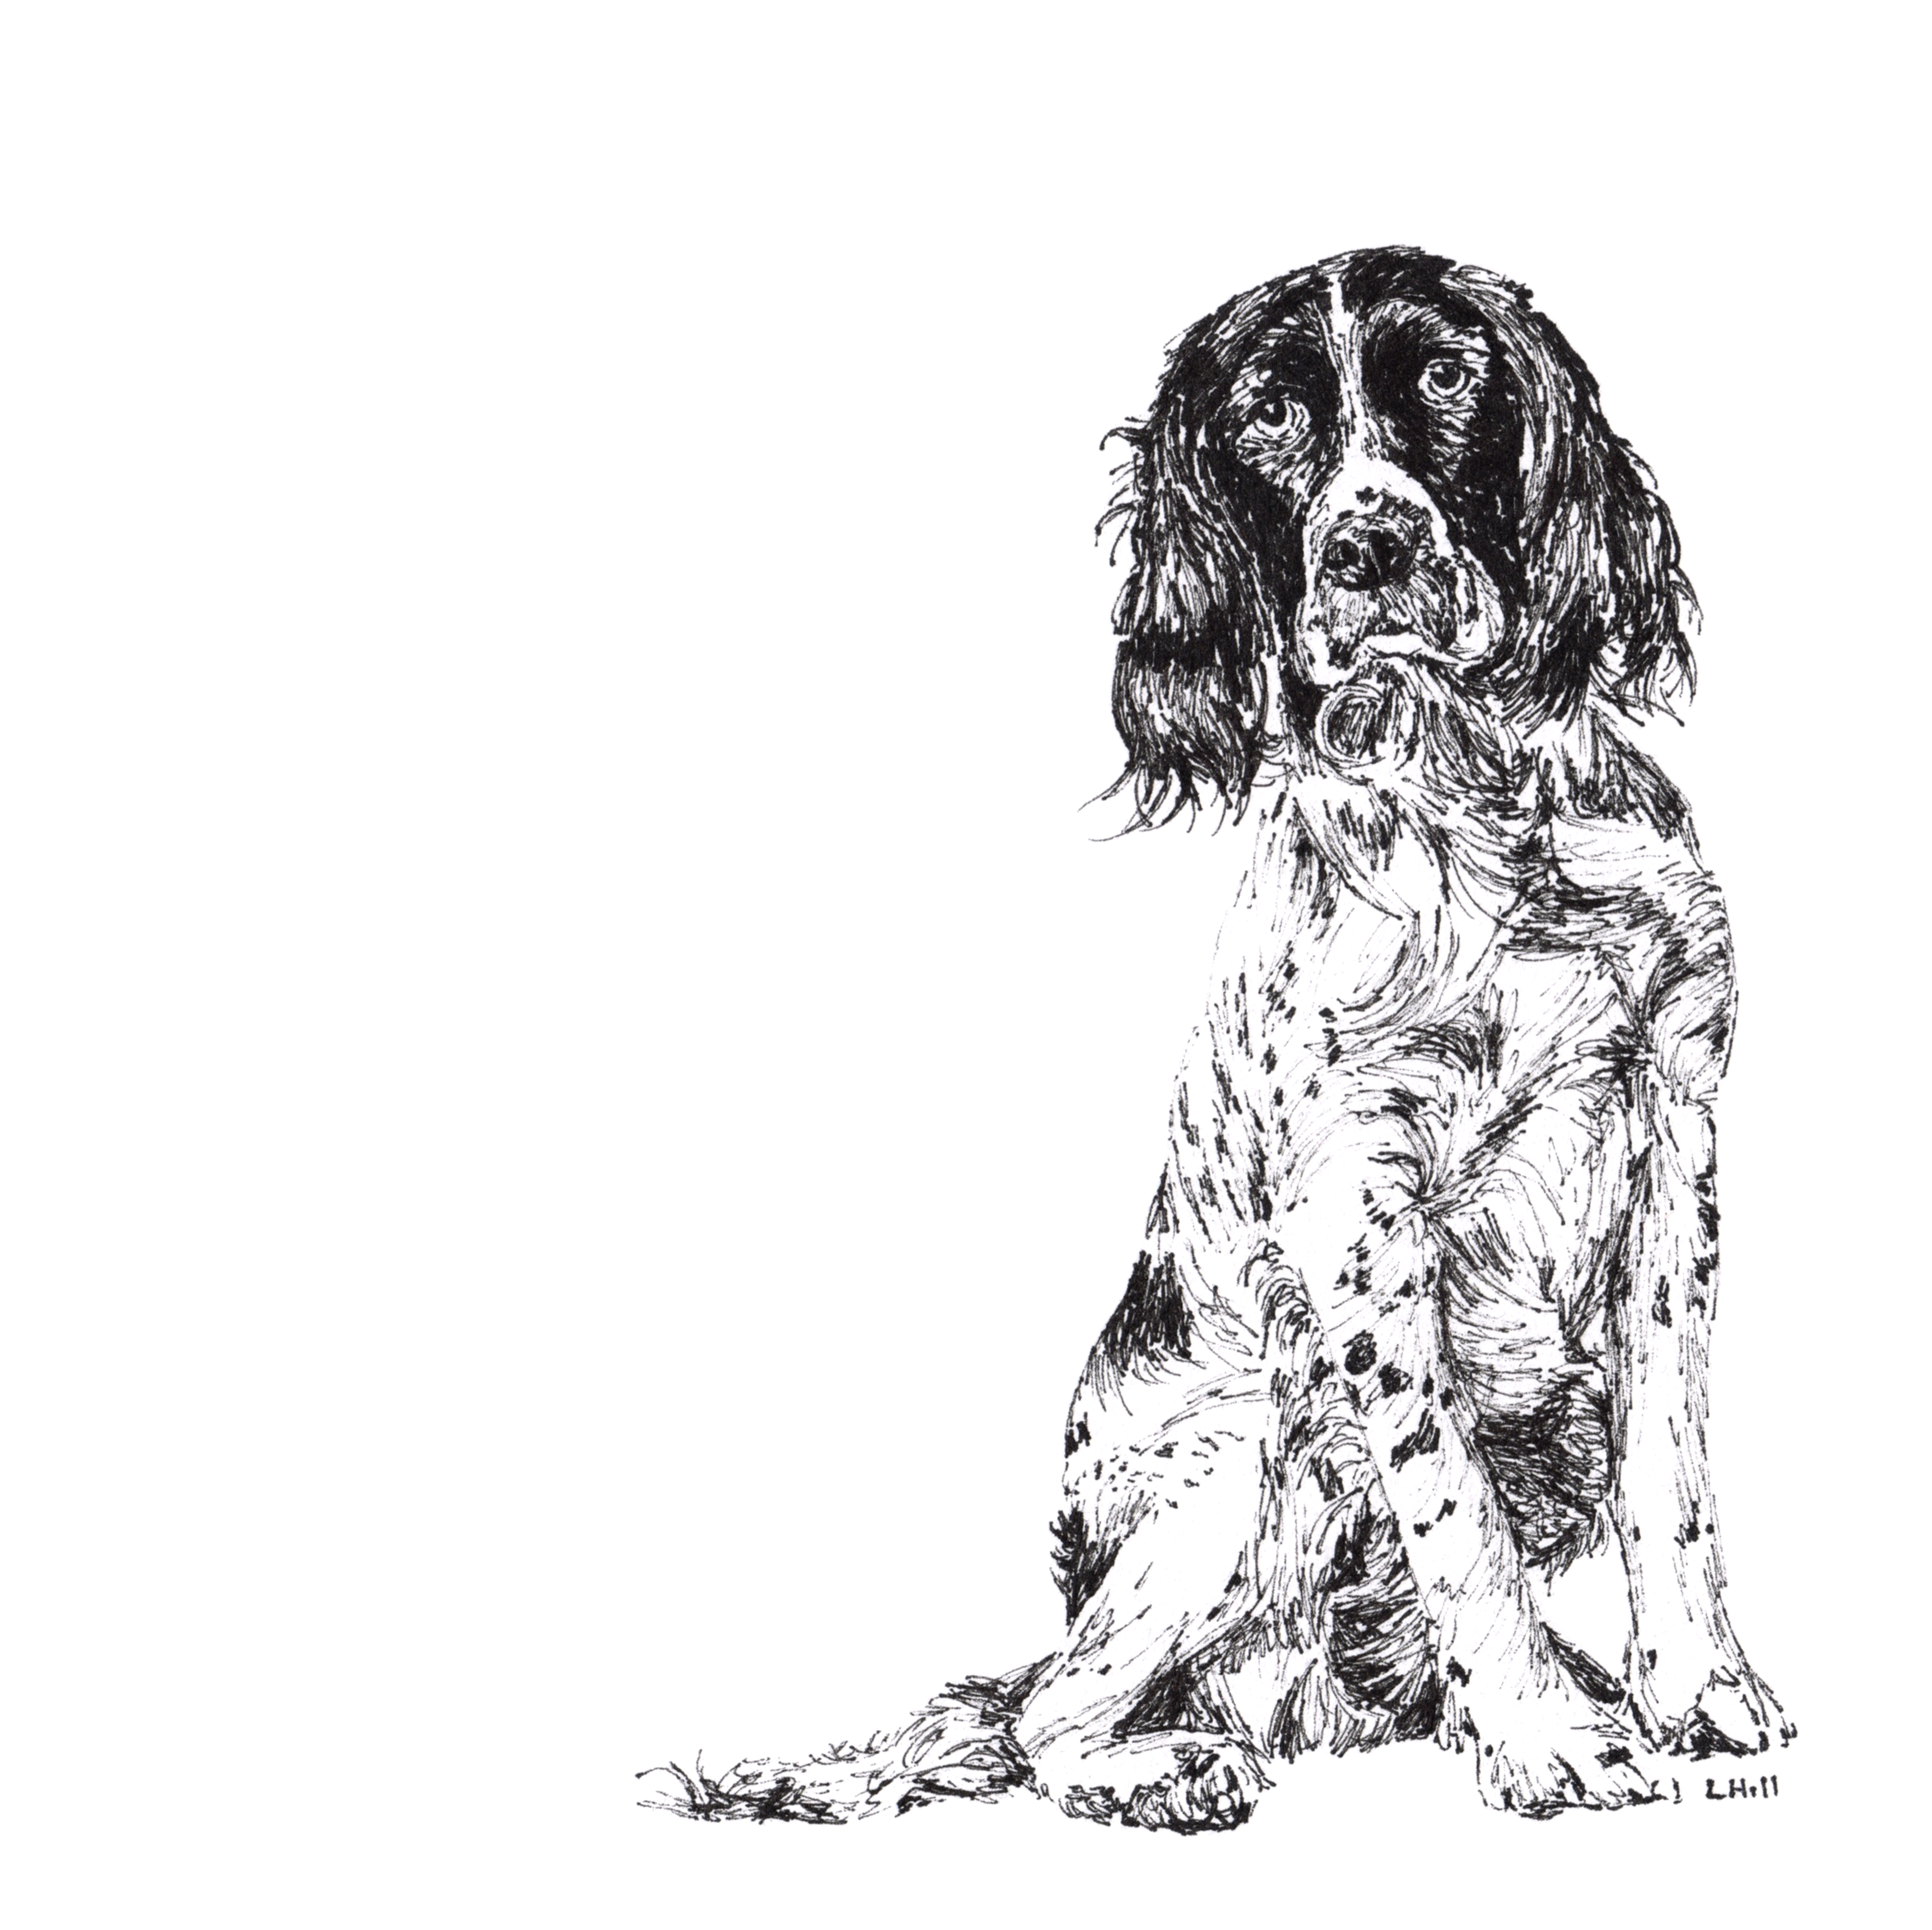 Springer Spaniel pen and ink illustration by Louisa Hill